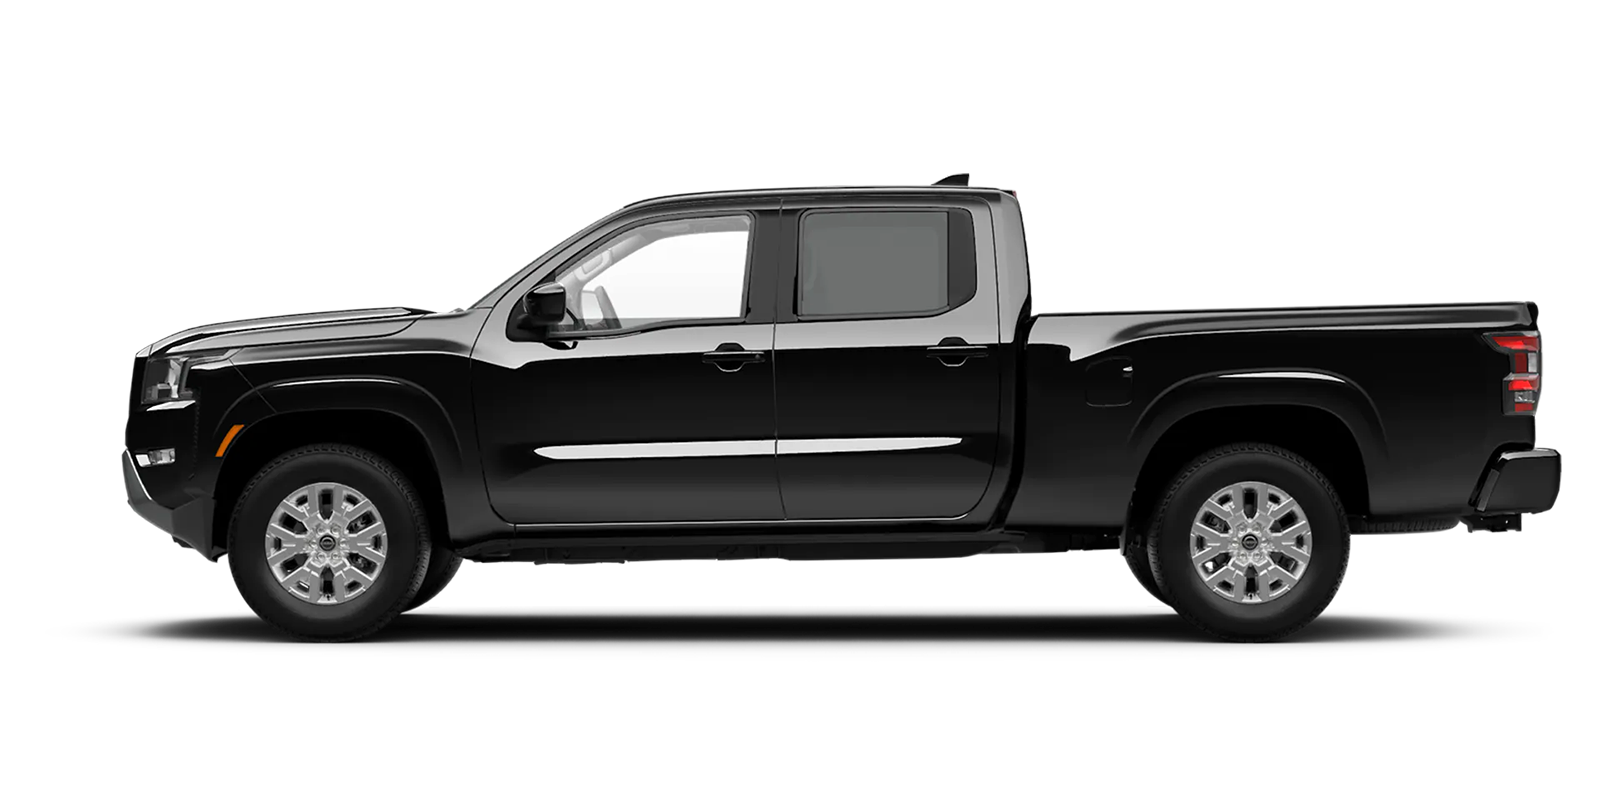 2022 Frontier Crew Cab Long Bed SV 4x2 in Super Black | Mitchell Nissan in Enterprise AL